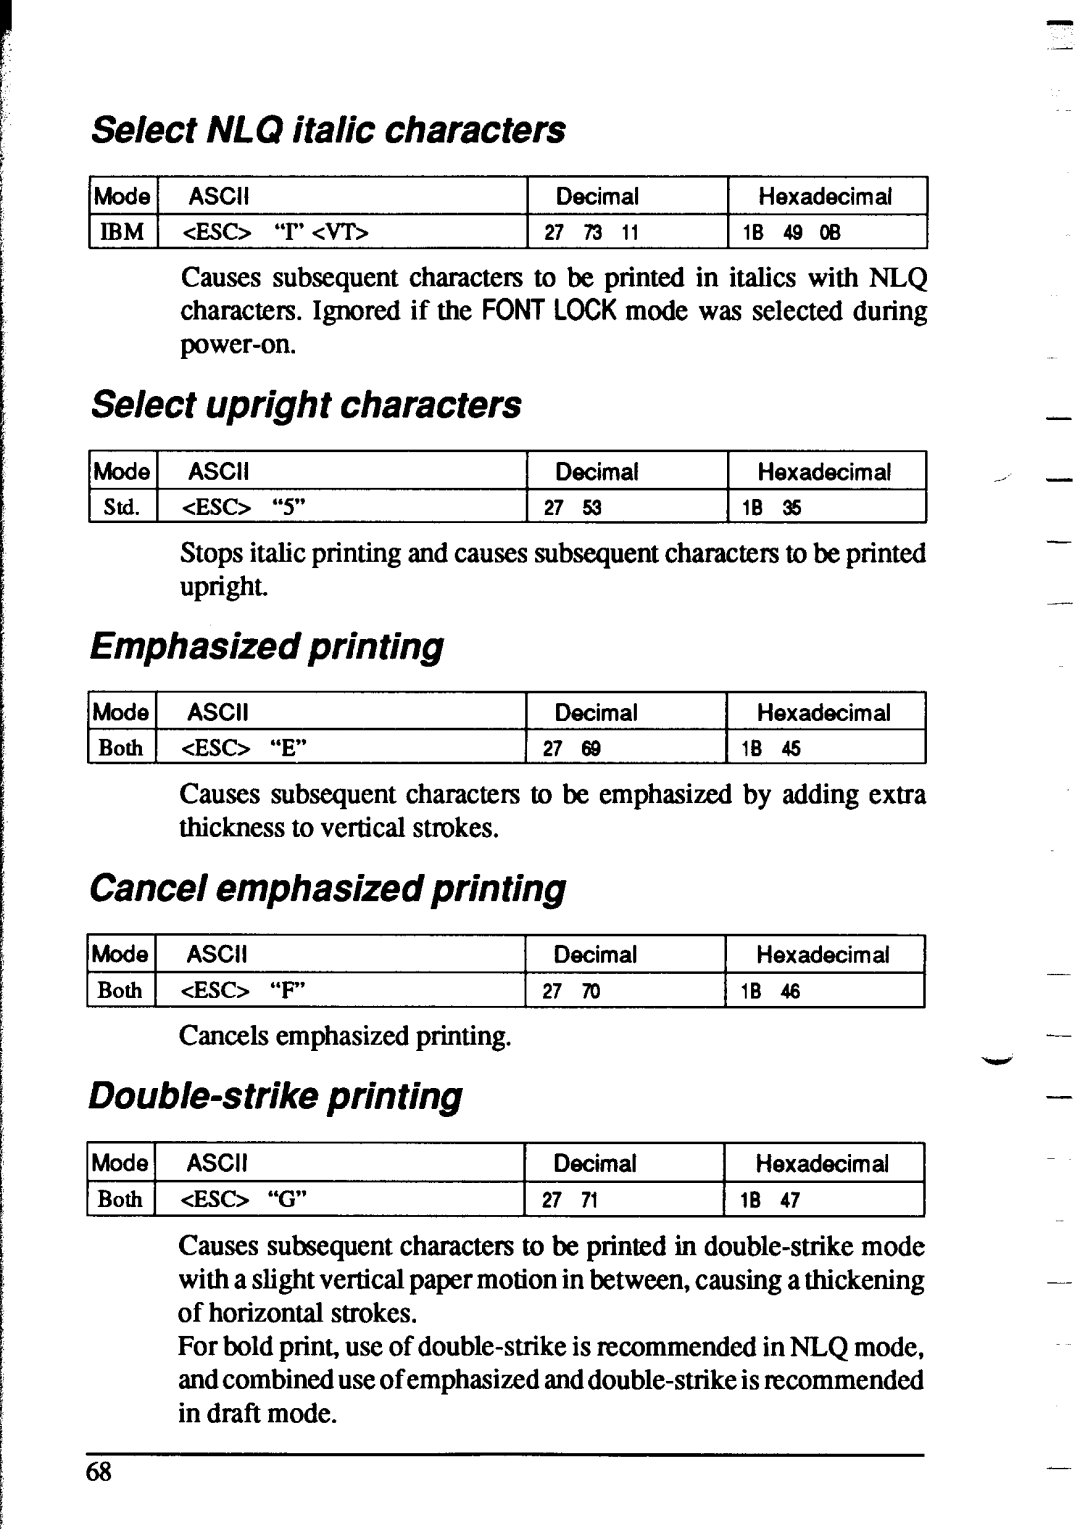 Star Micronics XR-1020 Select NLQ italic characters, hlodeI ASCII, Select upright characters, Mode ASCII, Double-strike 